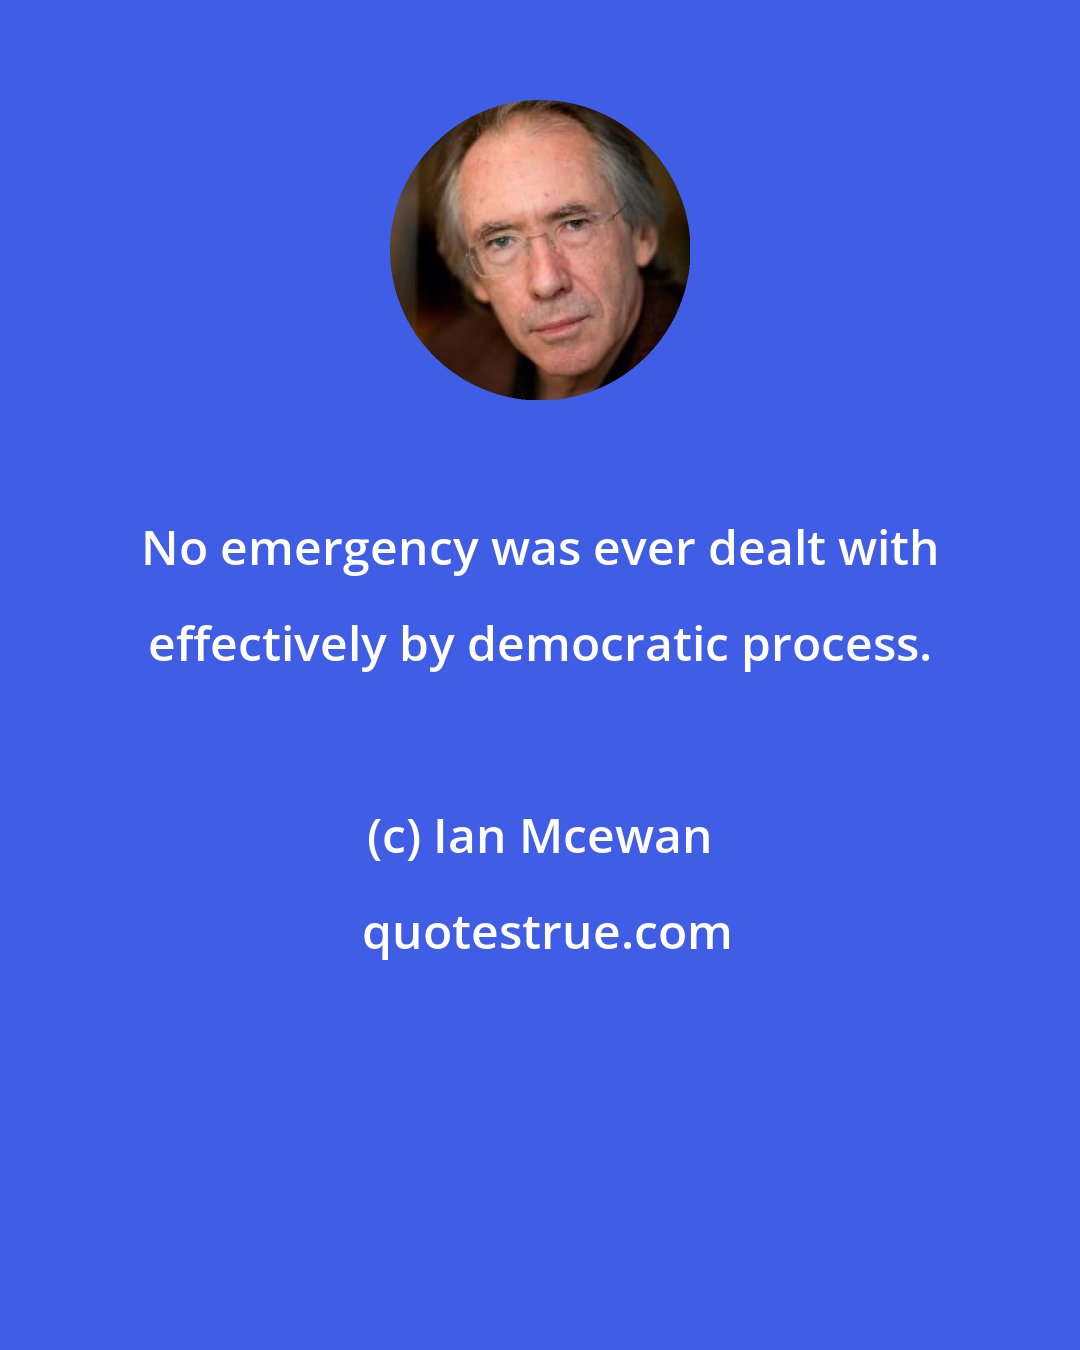 Ian Mcewan: No emergency was ever dealt with effectively by democratic process.